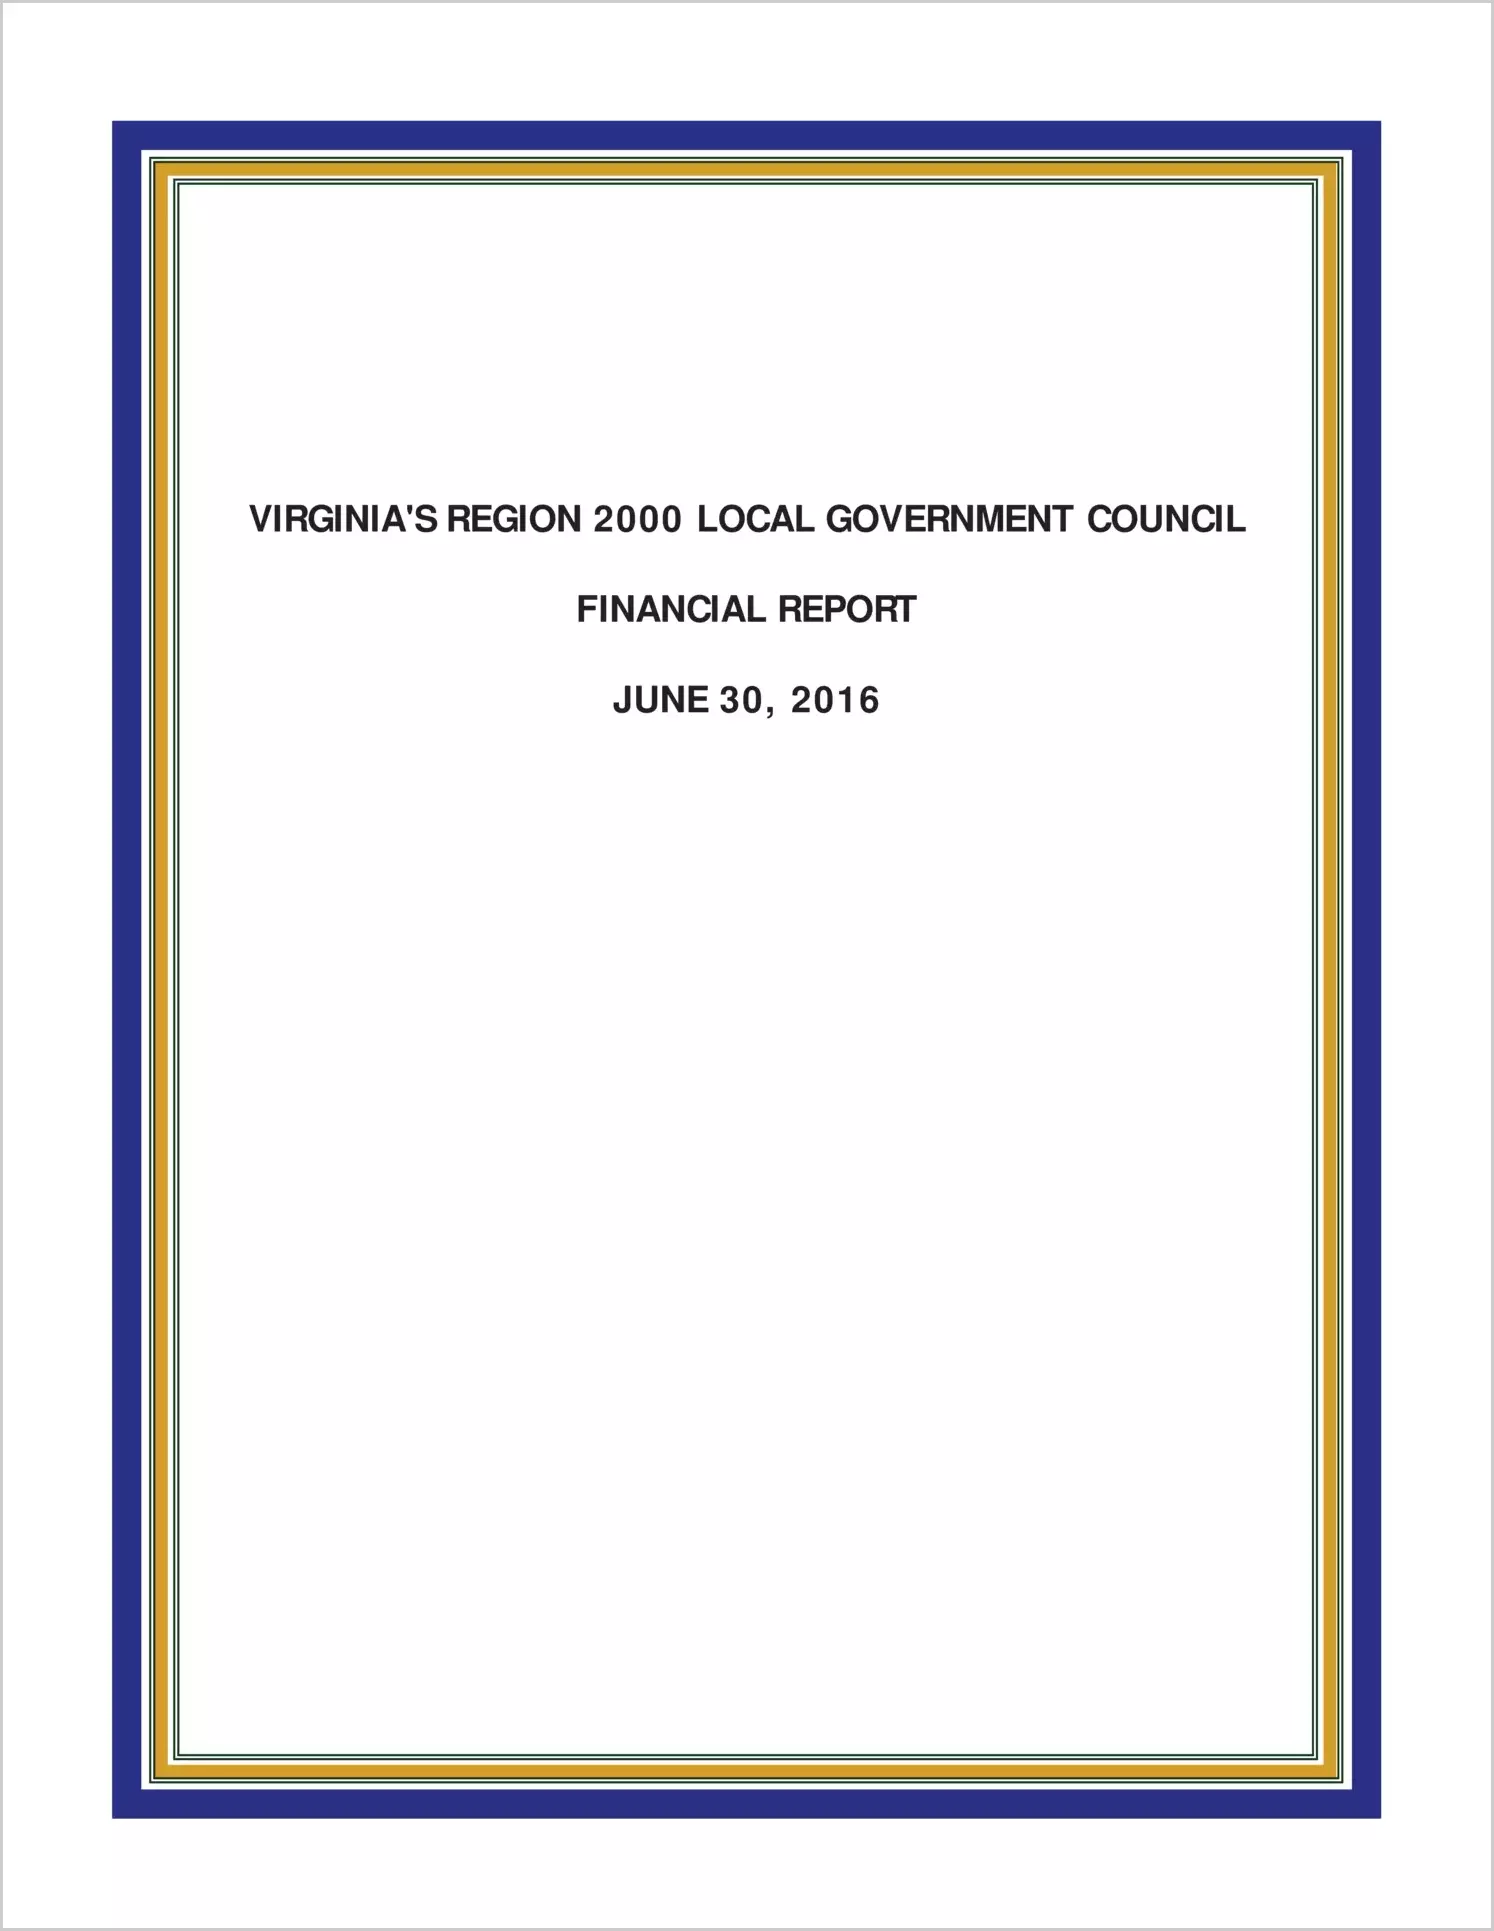 2016 ABC/Other Annual Financial Report  for Virginia's Region 2000 Local Government Council